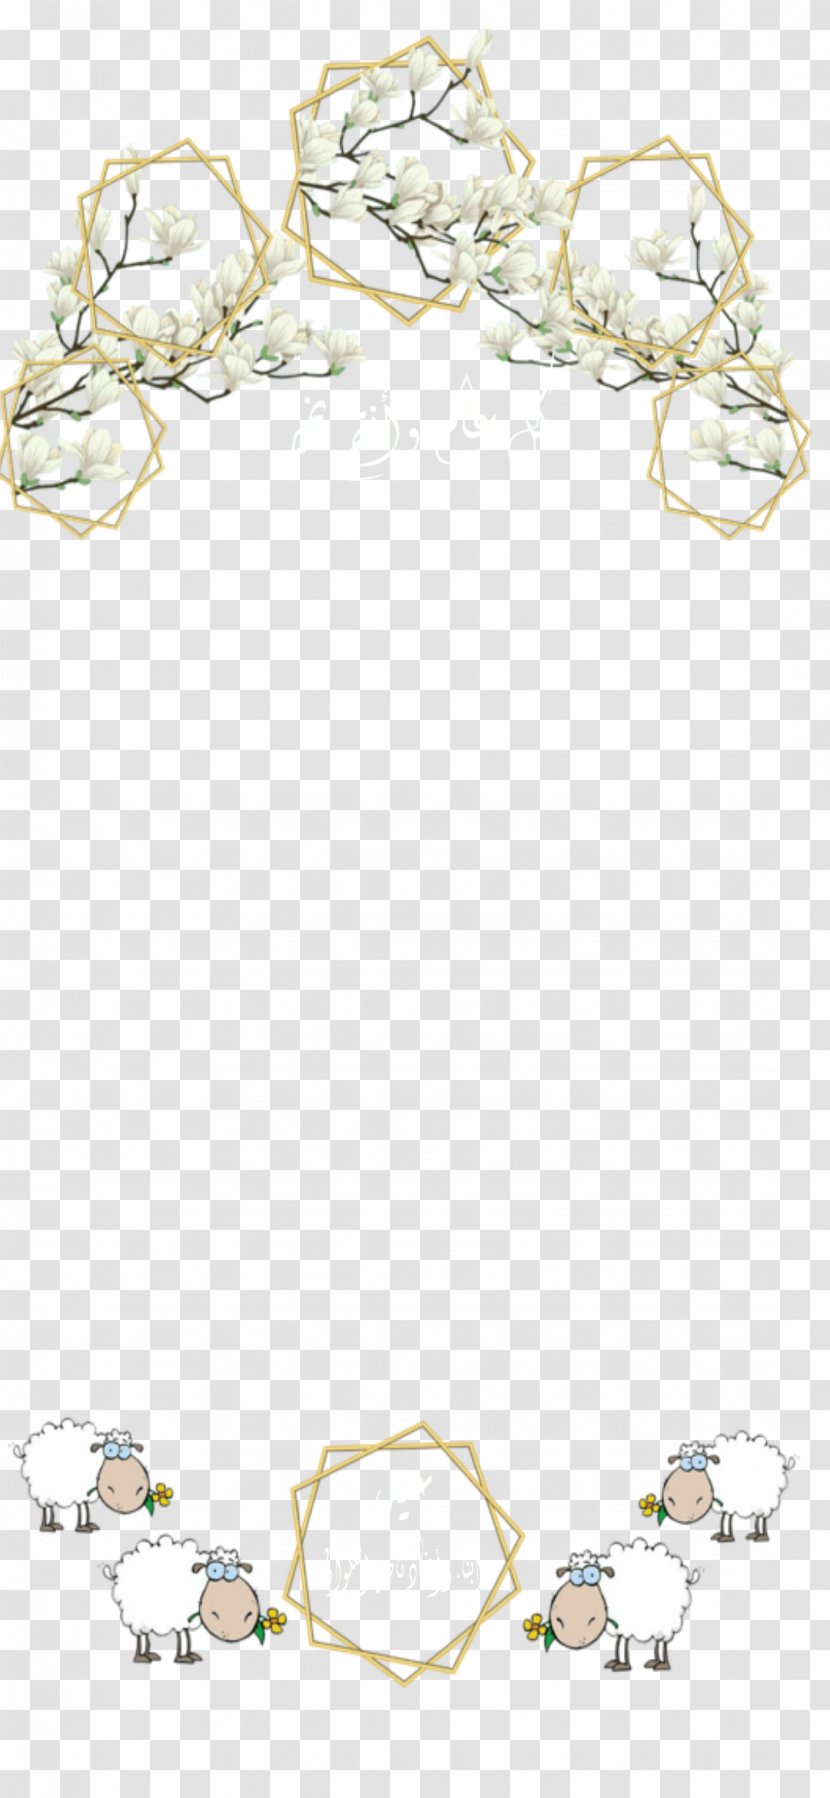 Necklace Paper Clothing Accessories Jewellery Product Design - Eid Flag Transparent PNG